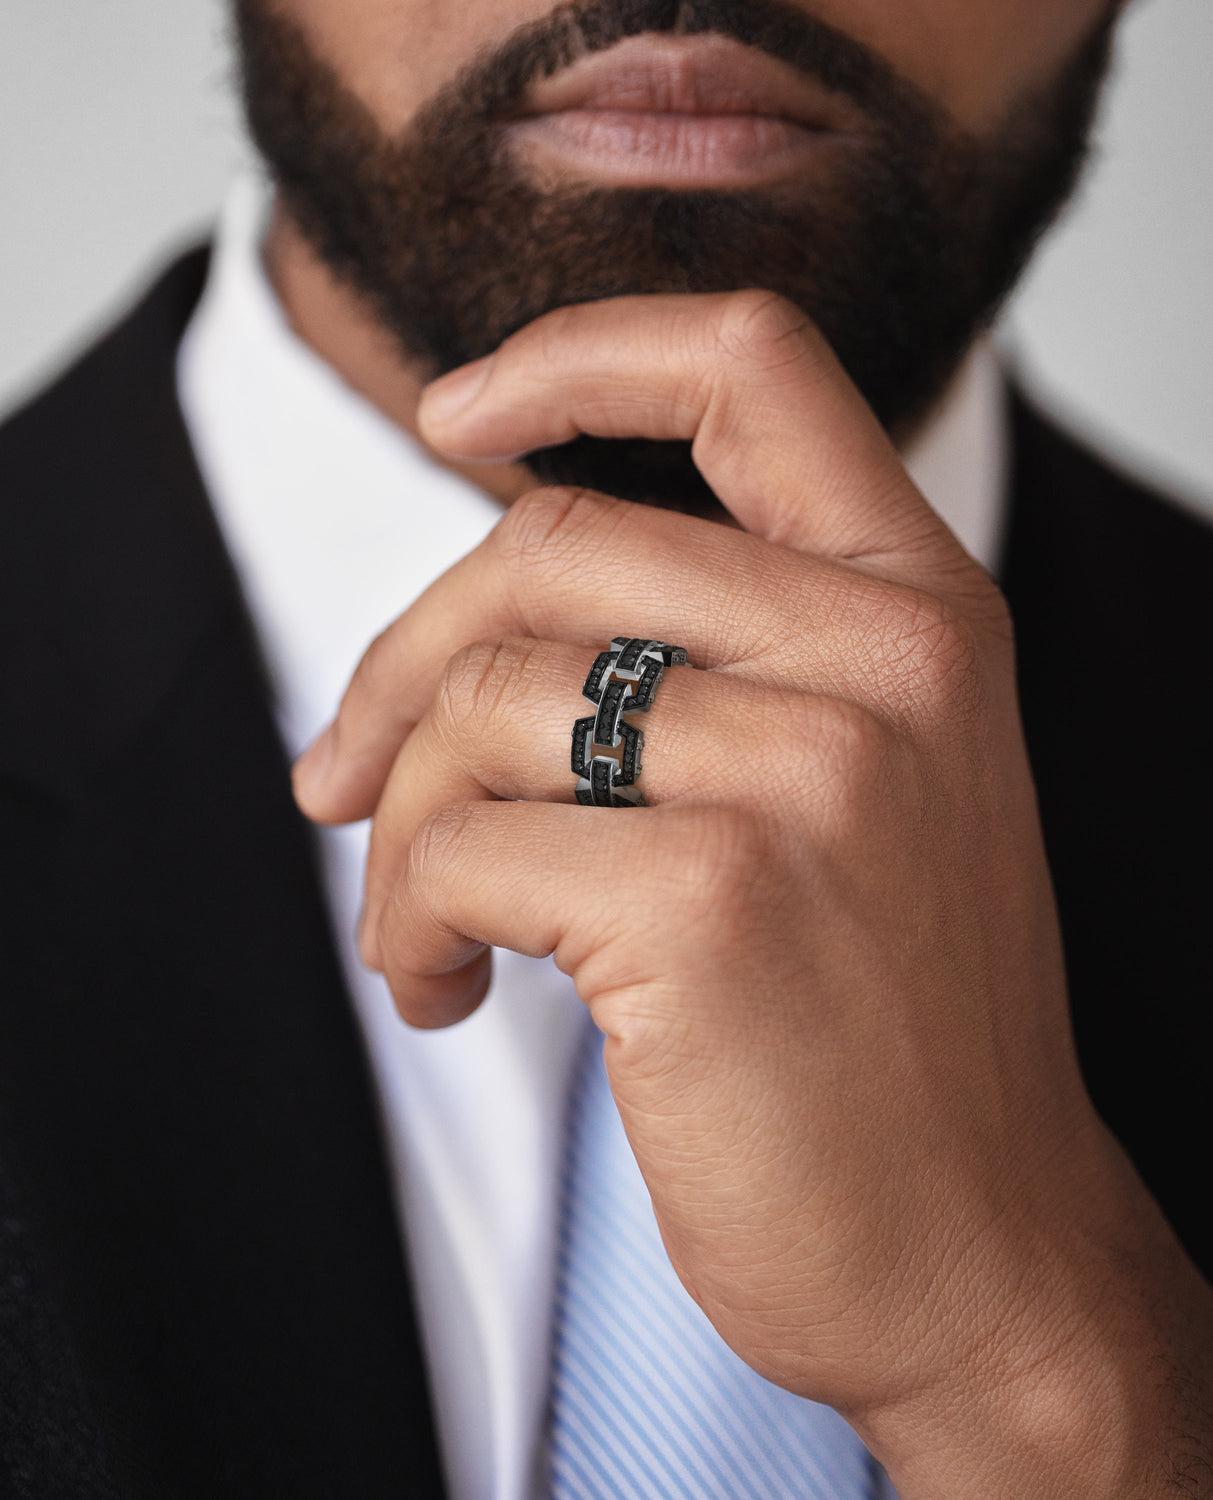 The grand design of this ring is a fusion of two different styles: contemporary classic and cutting-edge modern, all rendered in a gorgeous 1.10ct black diamond pave setting and metals with very fine attention to the detail. The Northstar is serving